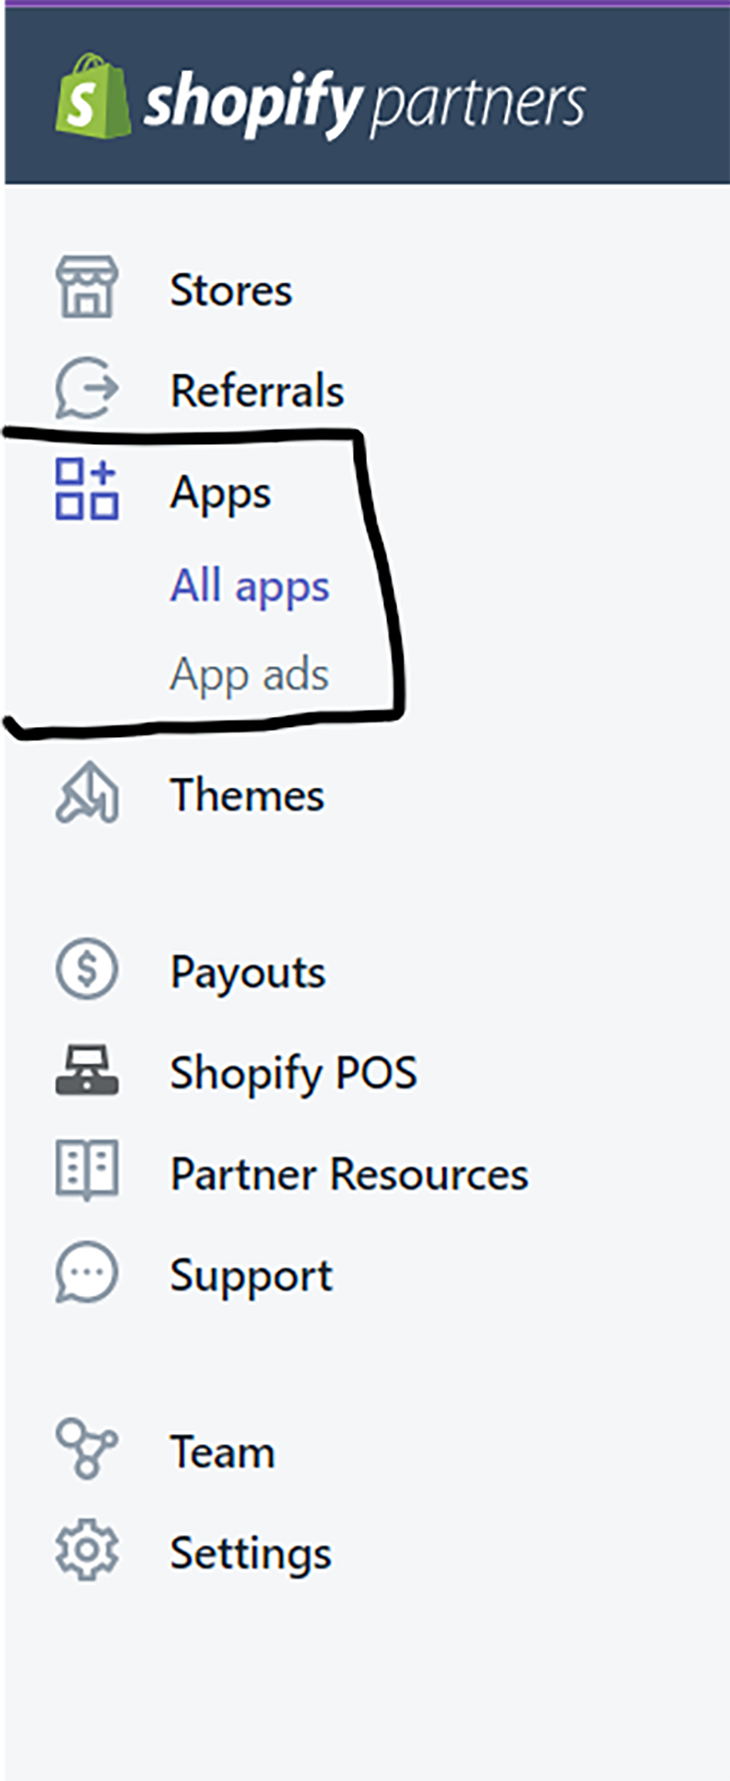 The Apps tab in the Shopify Partner dashboard